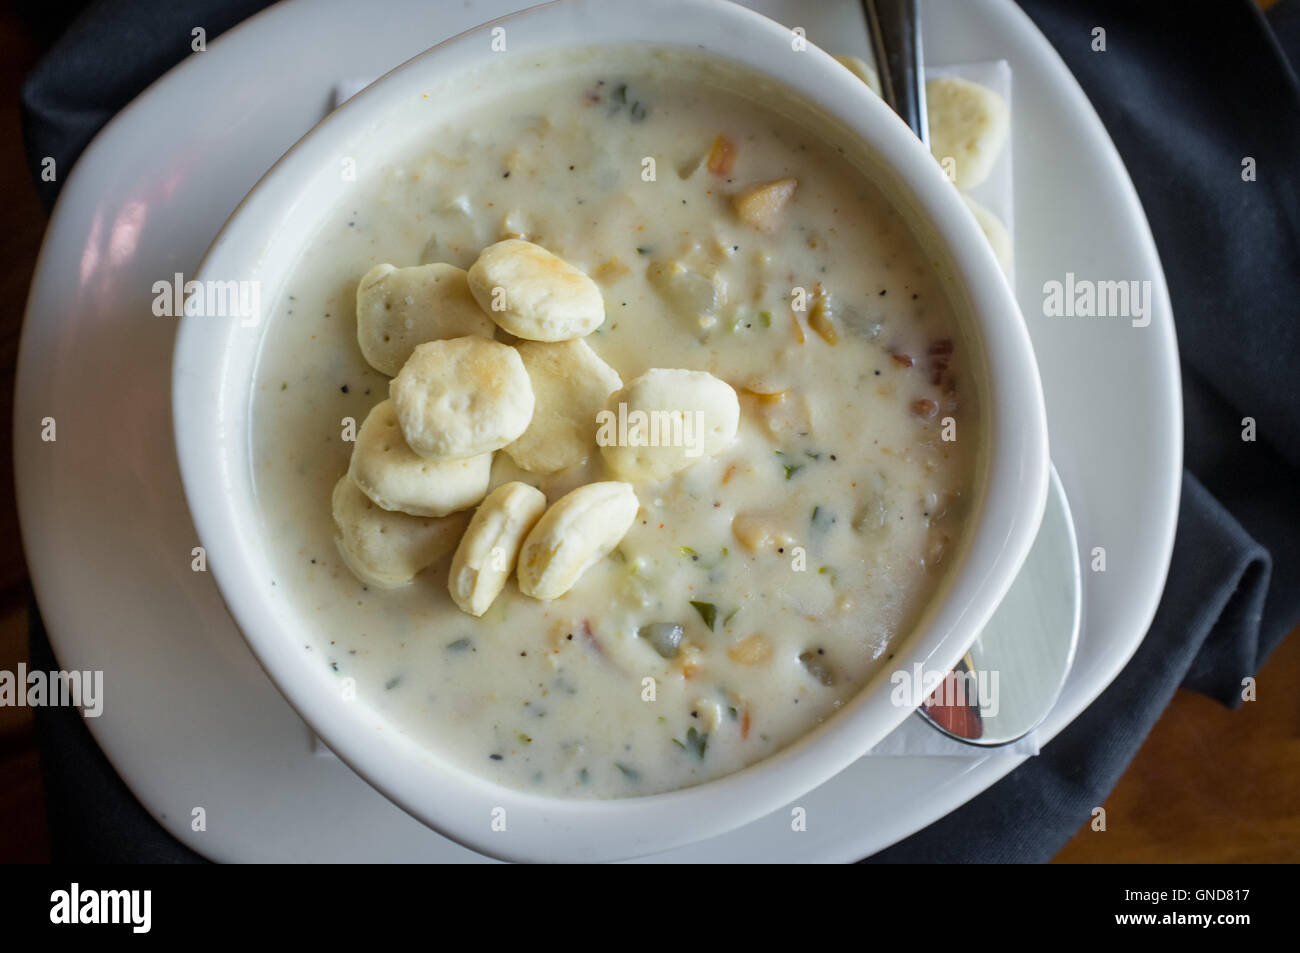 Creamy New England Clam Chowder garnished with oyster crackers 